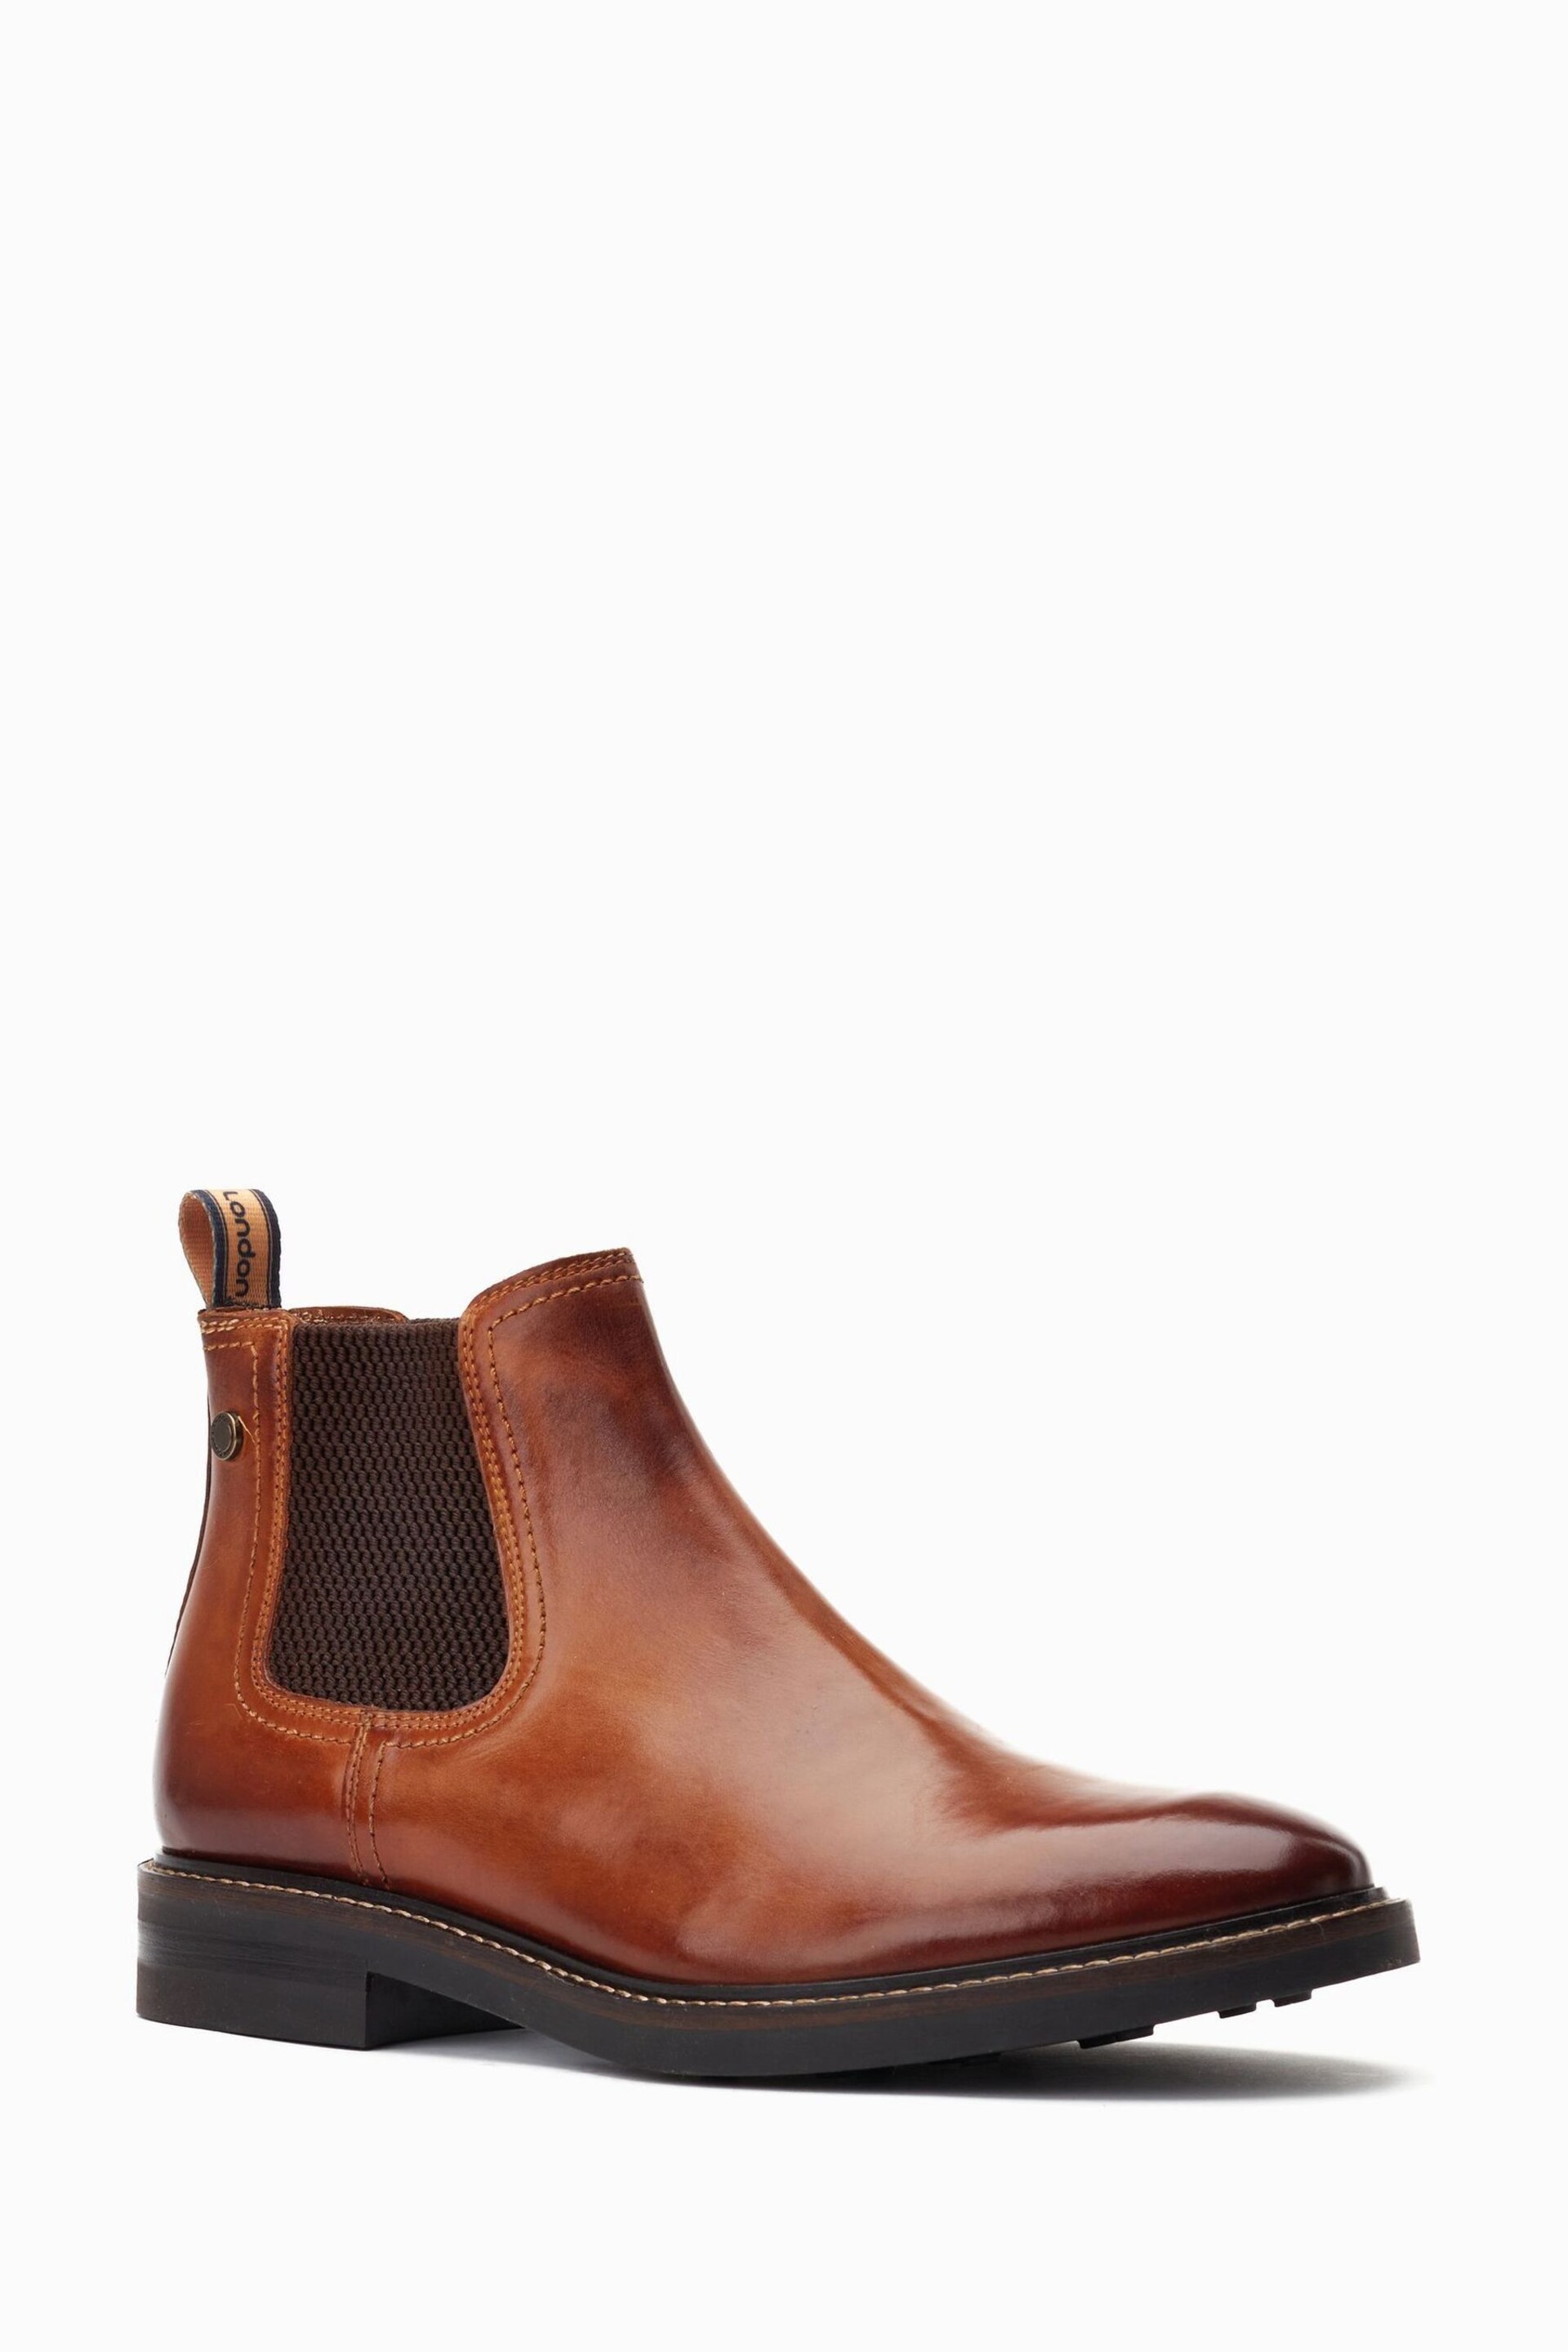 Base London Portland Pull On Chelsea Boots - Image 3 of 6